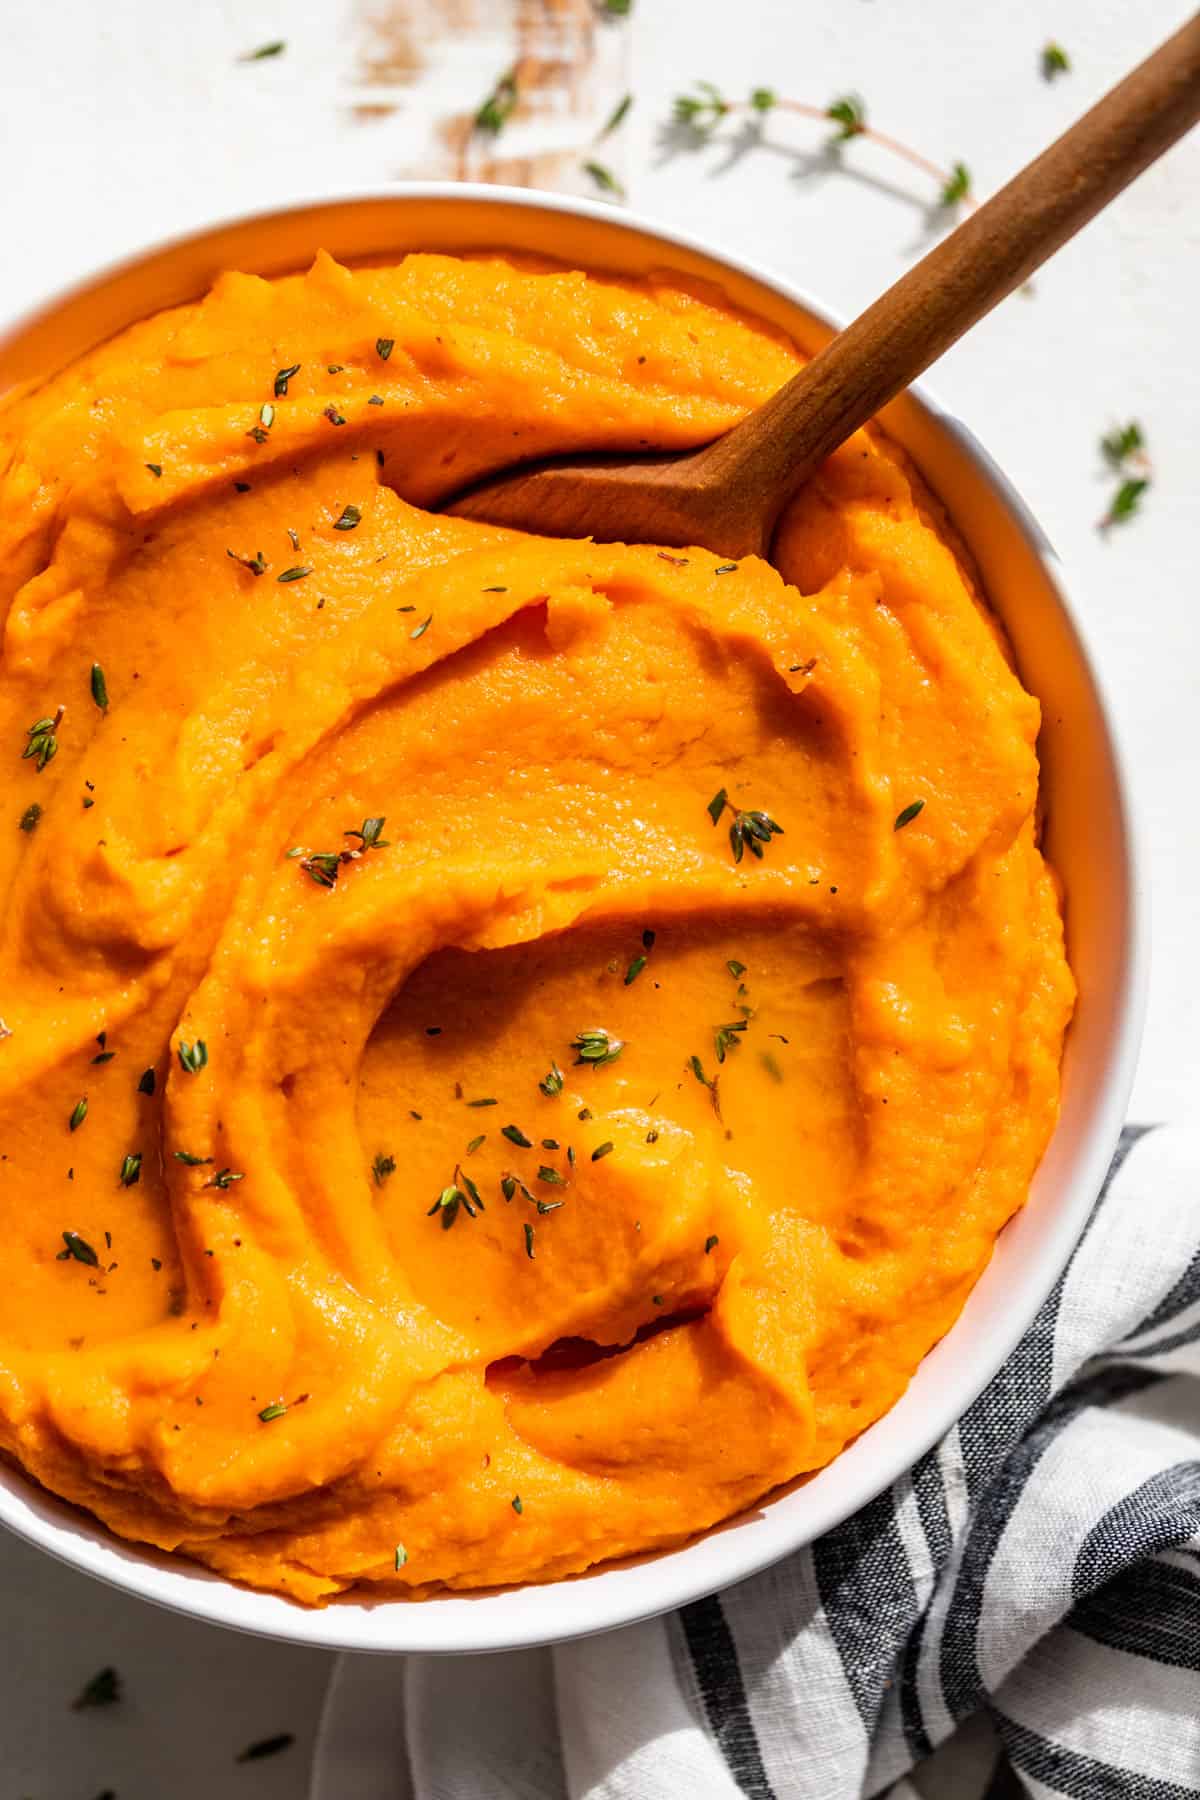 Downwards view of Mashed Sweet Potatoes in a white bowl with a wooden spoon.